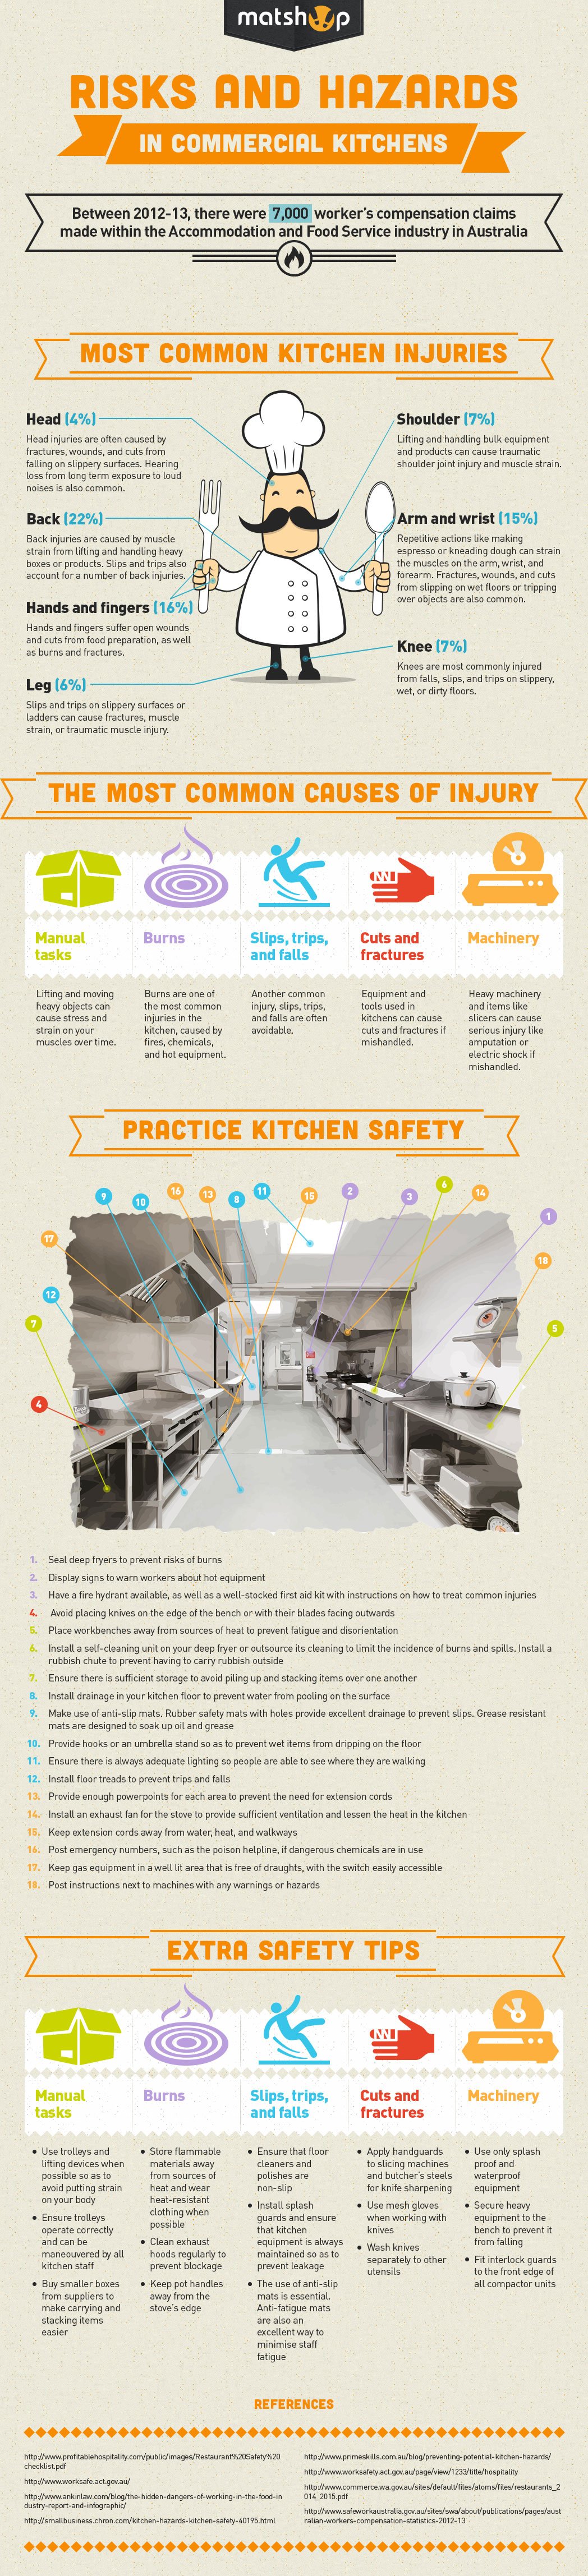 Infographic showing the risks and hazards of commercial kitchens, including how to avoid injury.